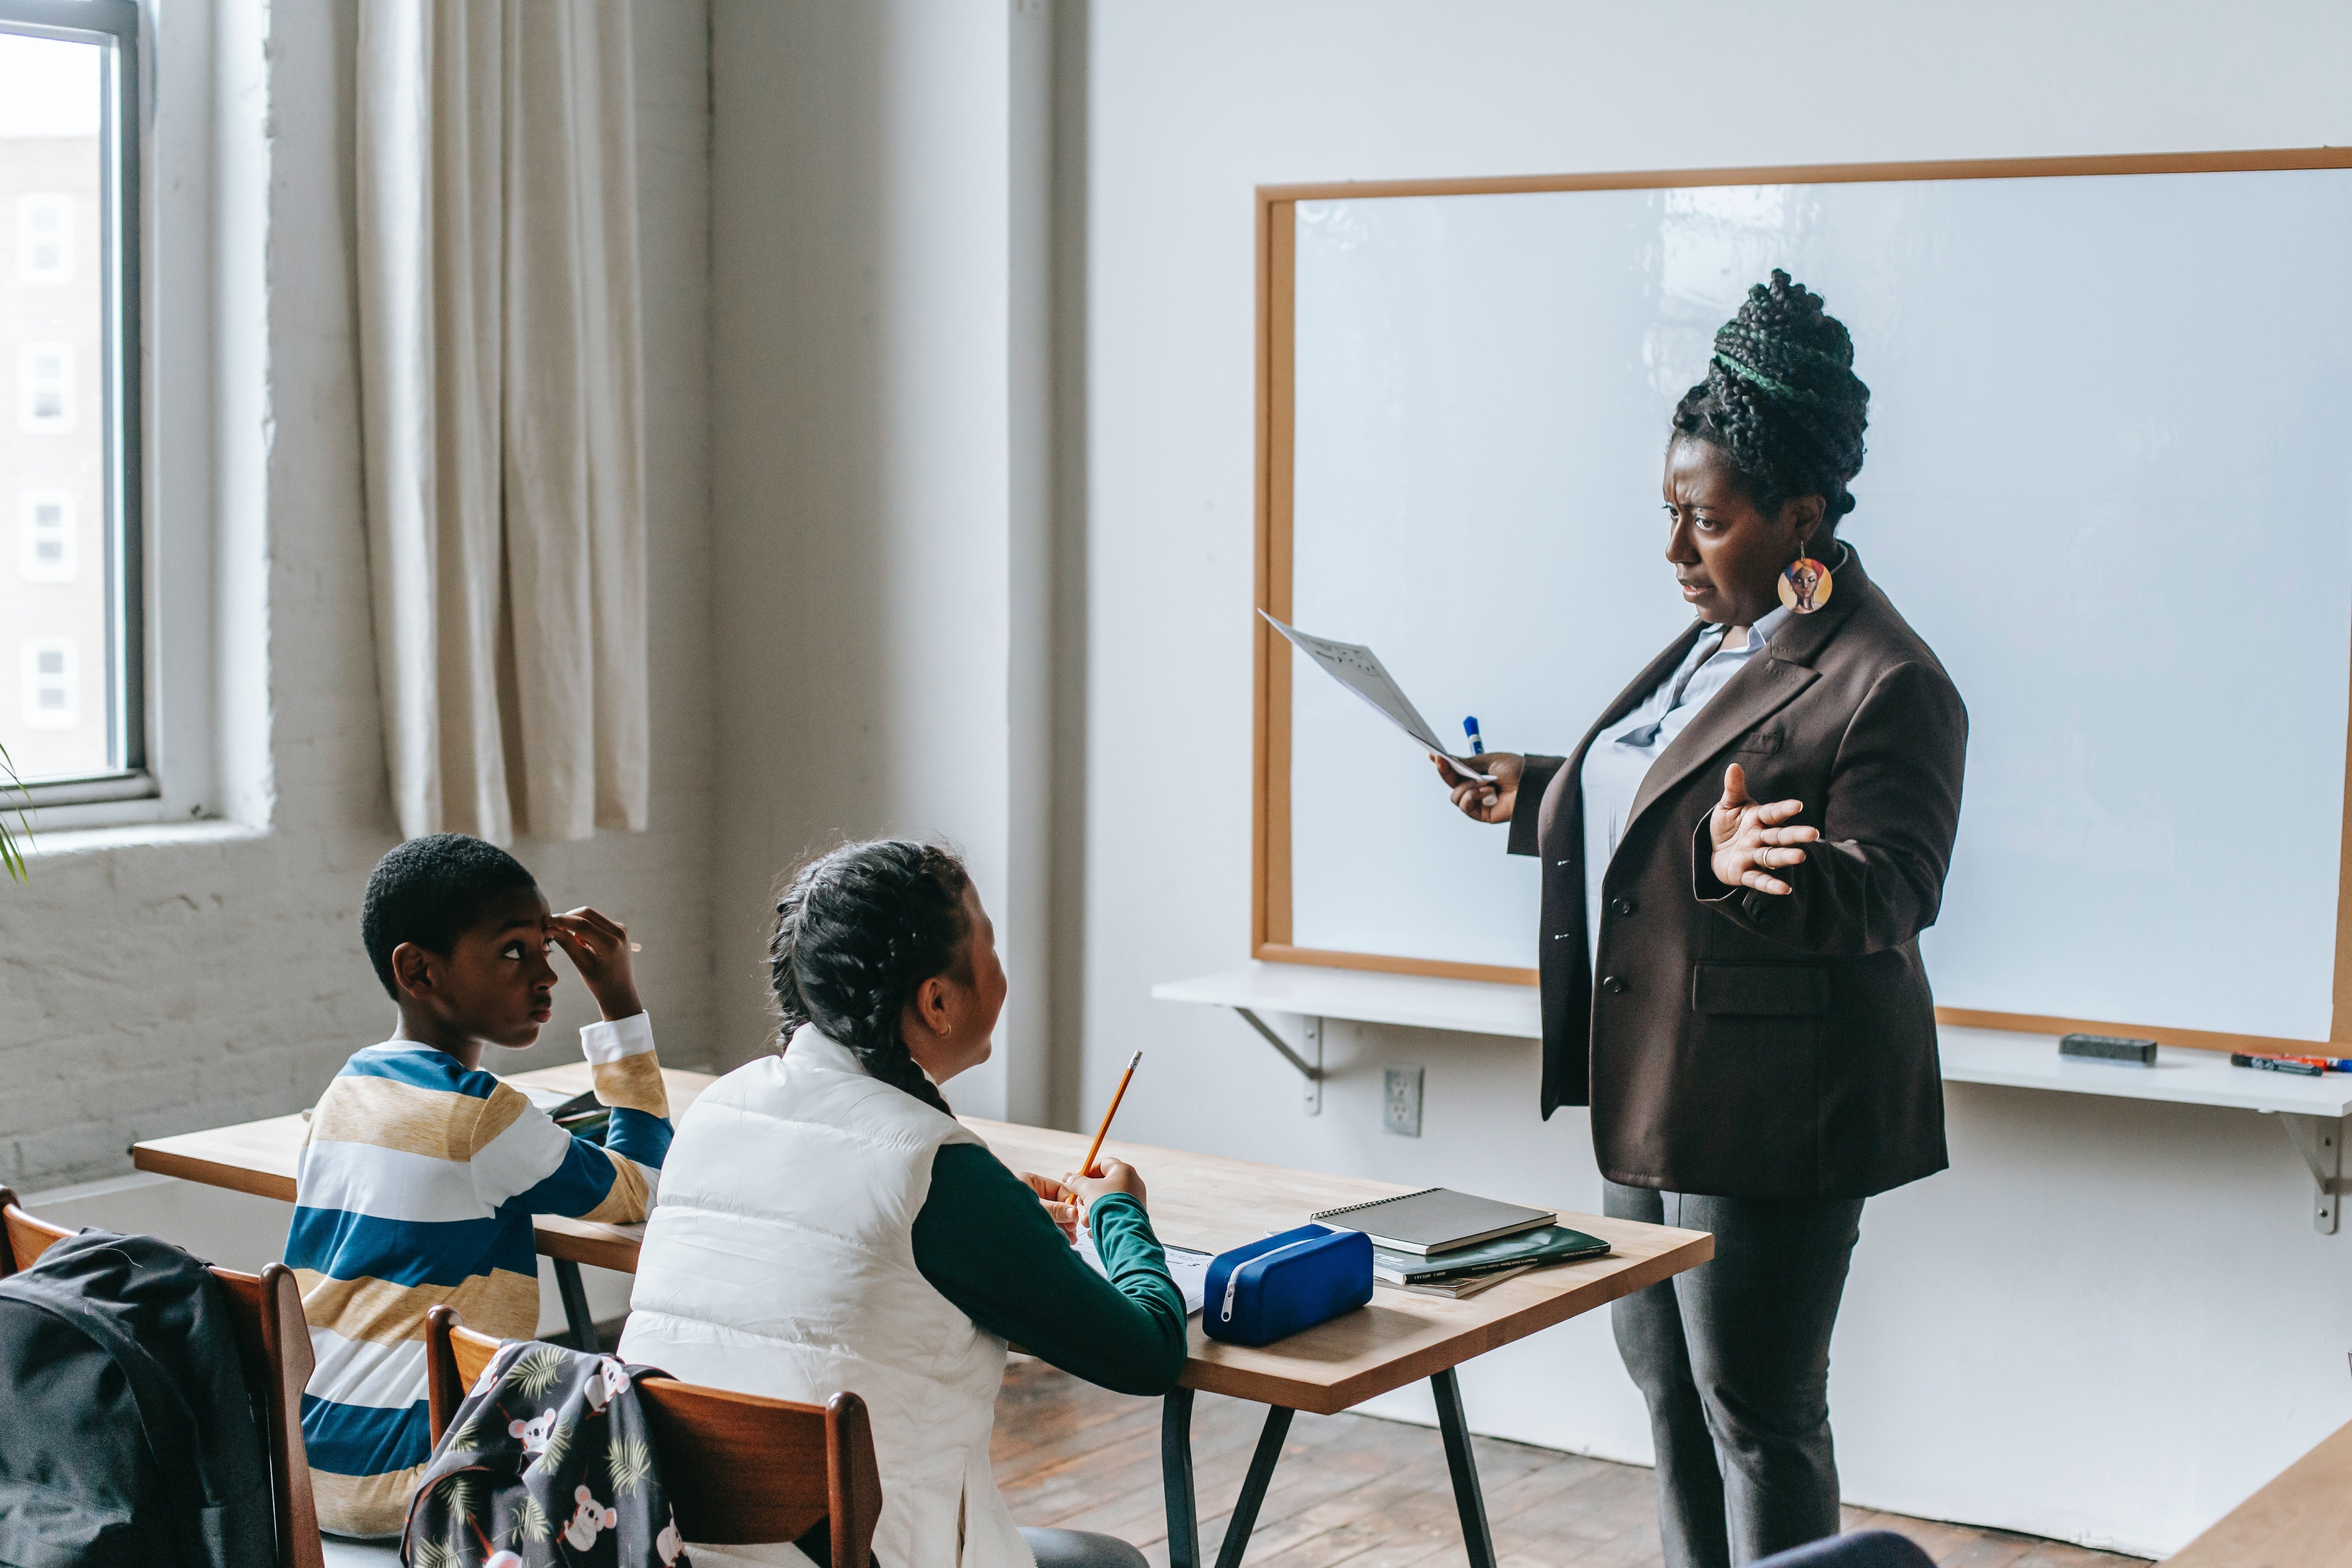 A teacher talking to students in class. | Photo: Pexels/Katerina Holmes